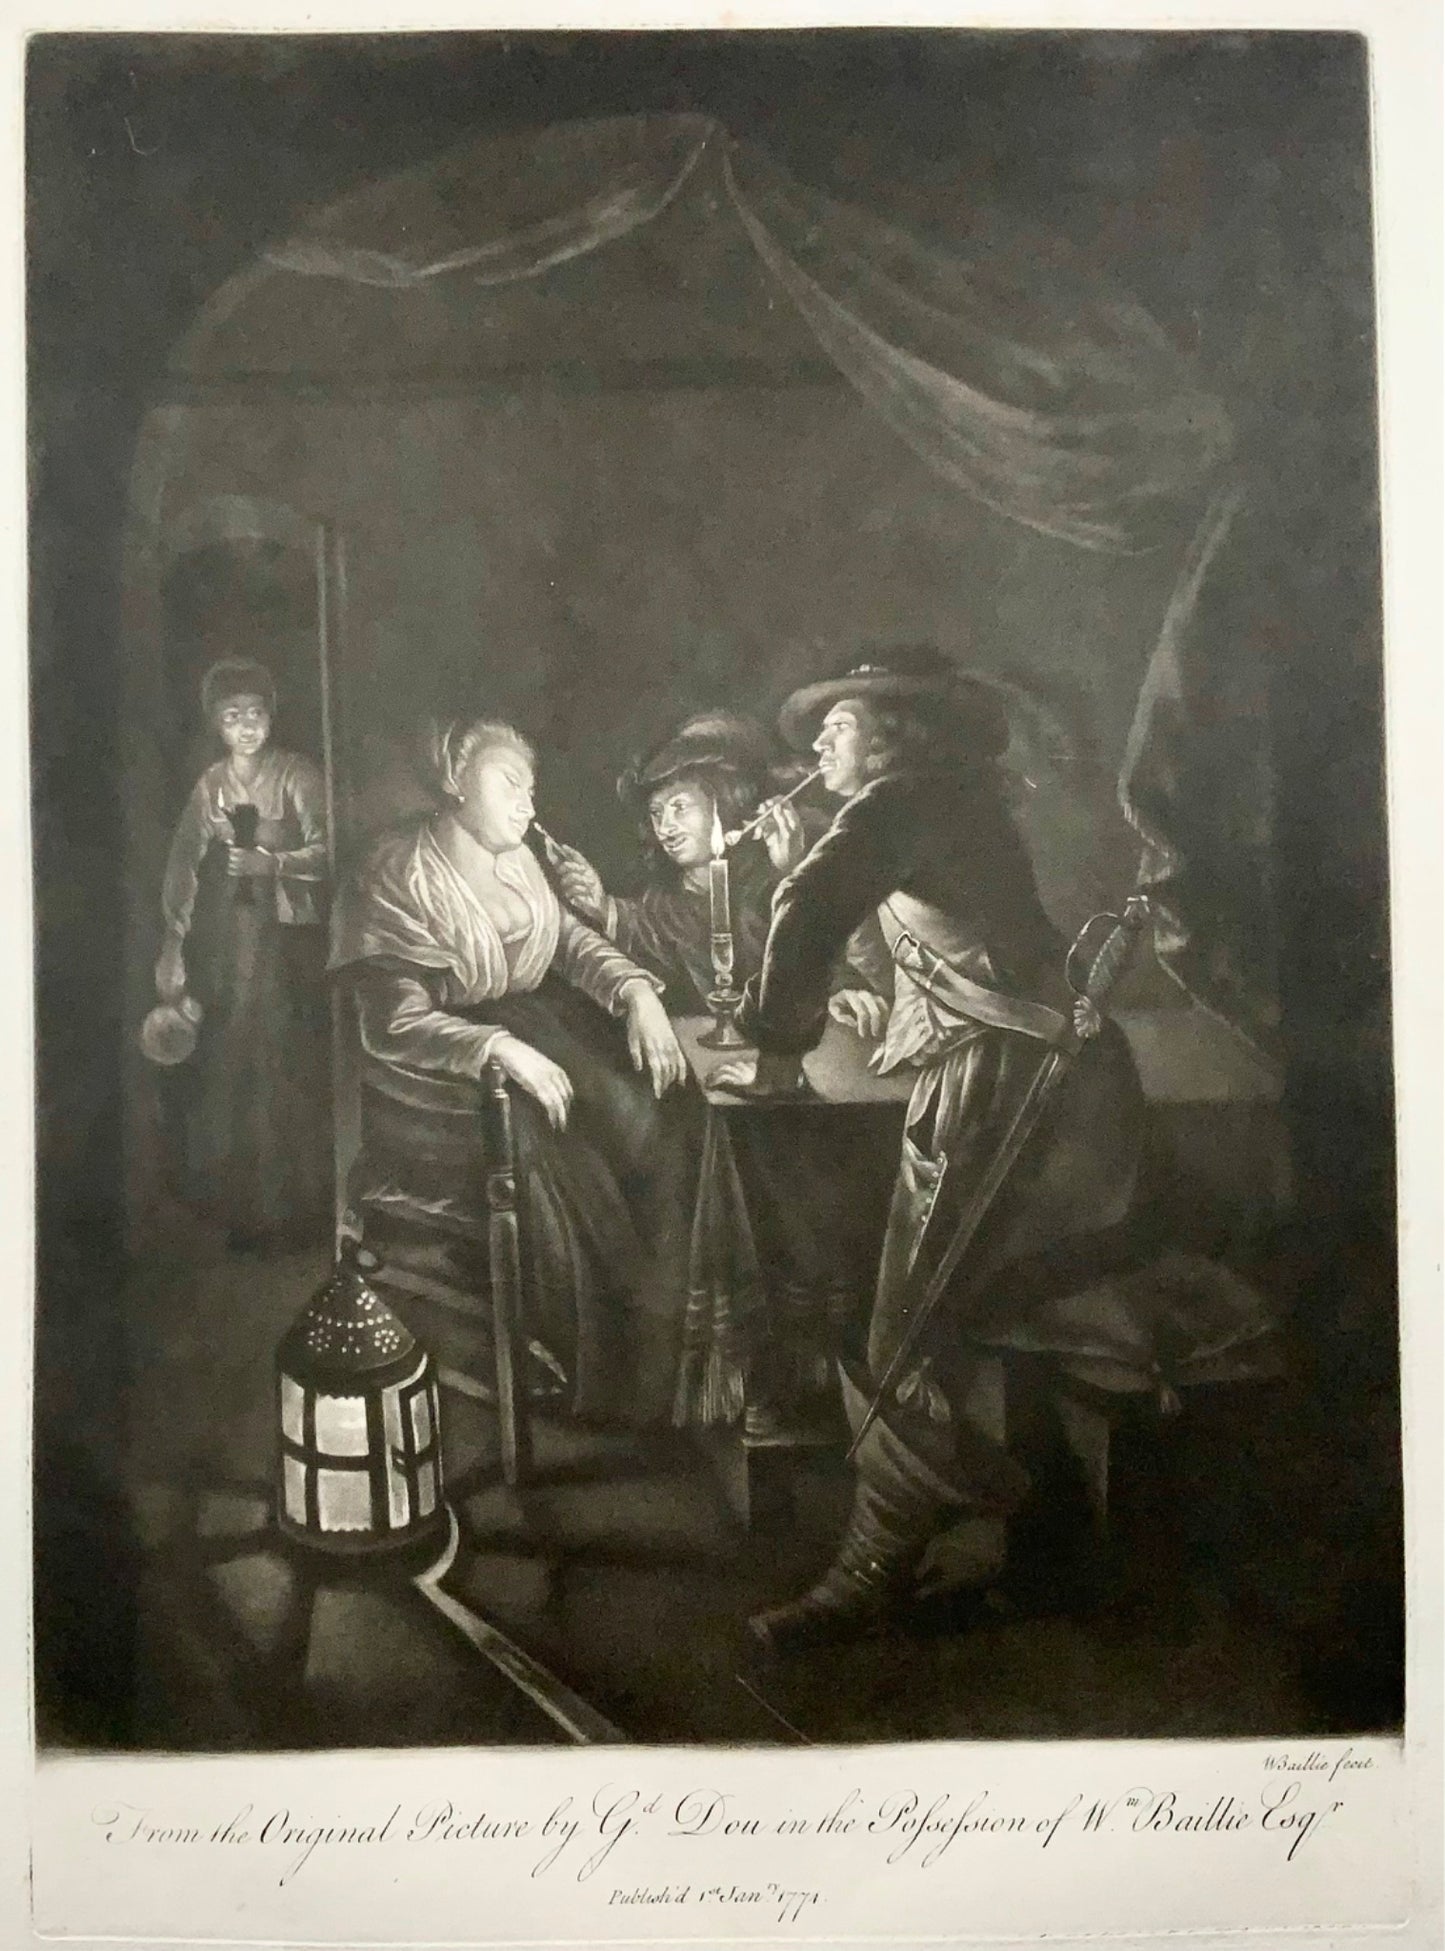 1774 Smoking by Candlelight, mezzotint by W. Baillie after Gerard Dou, genre